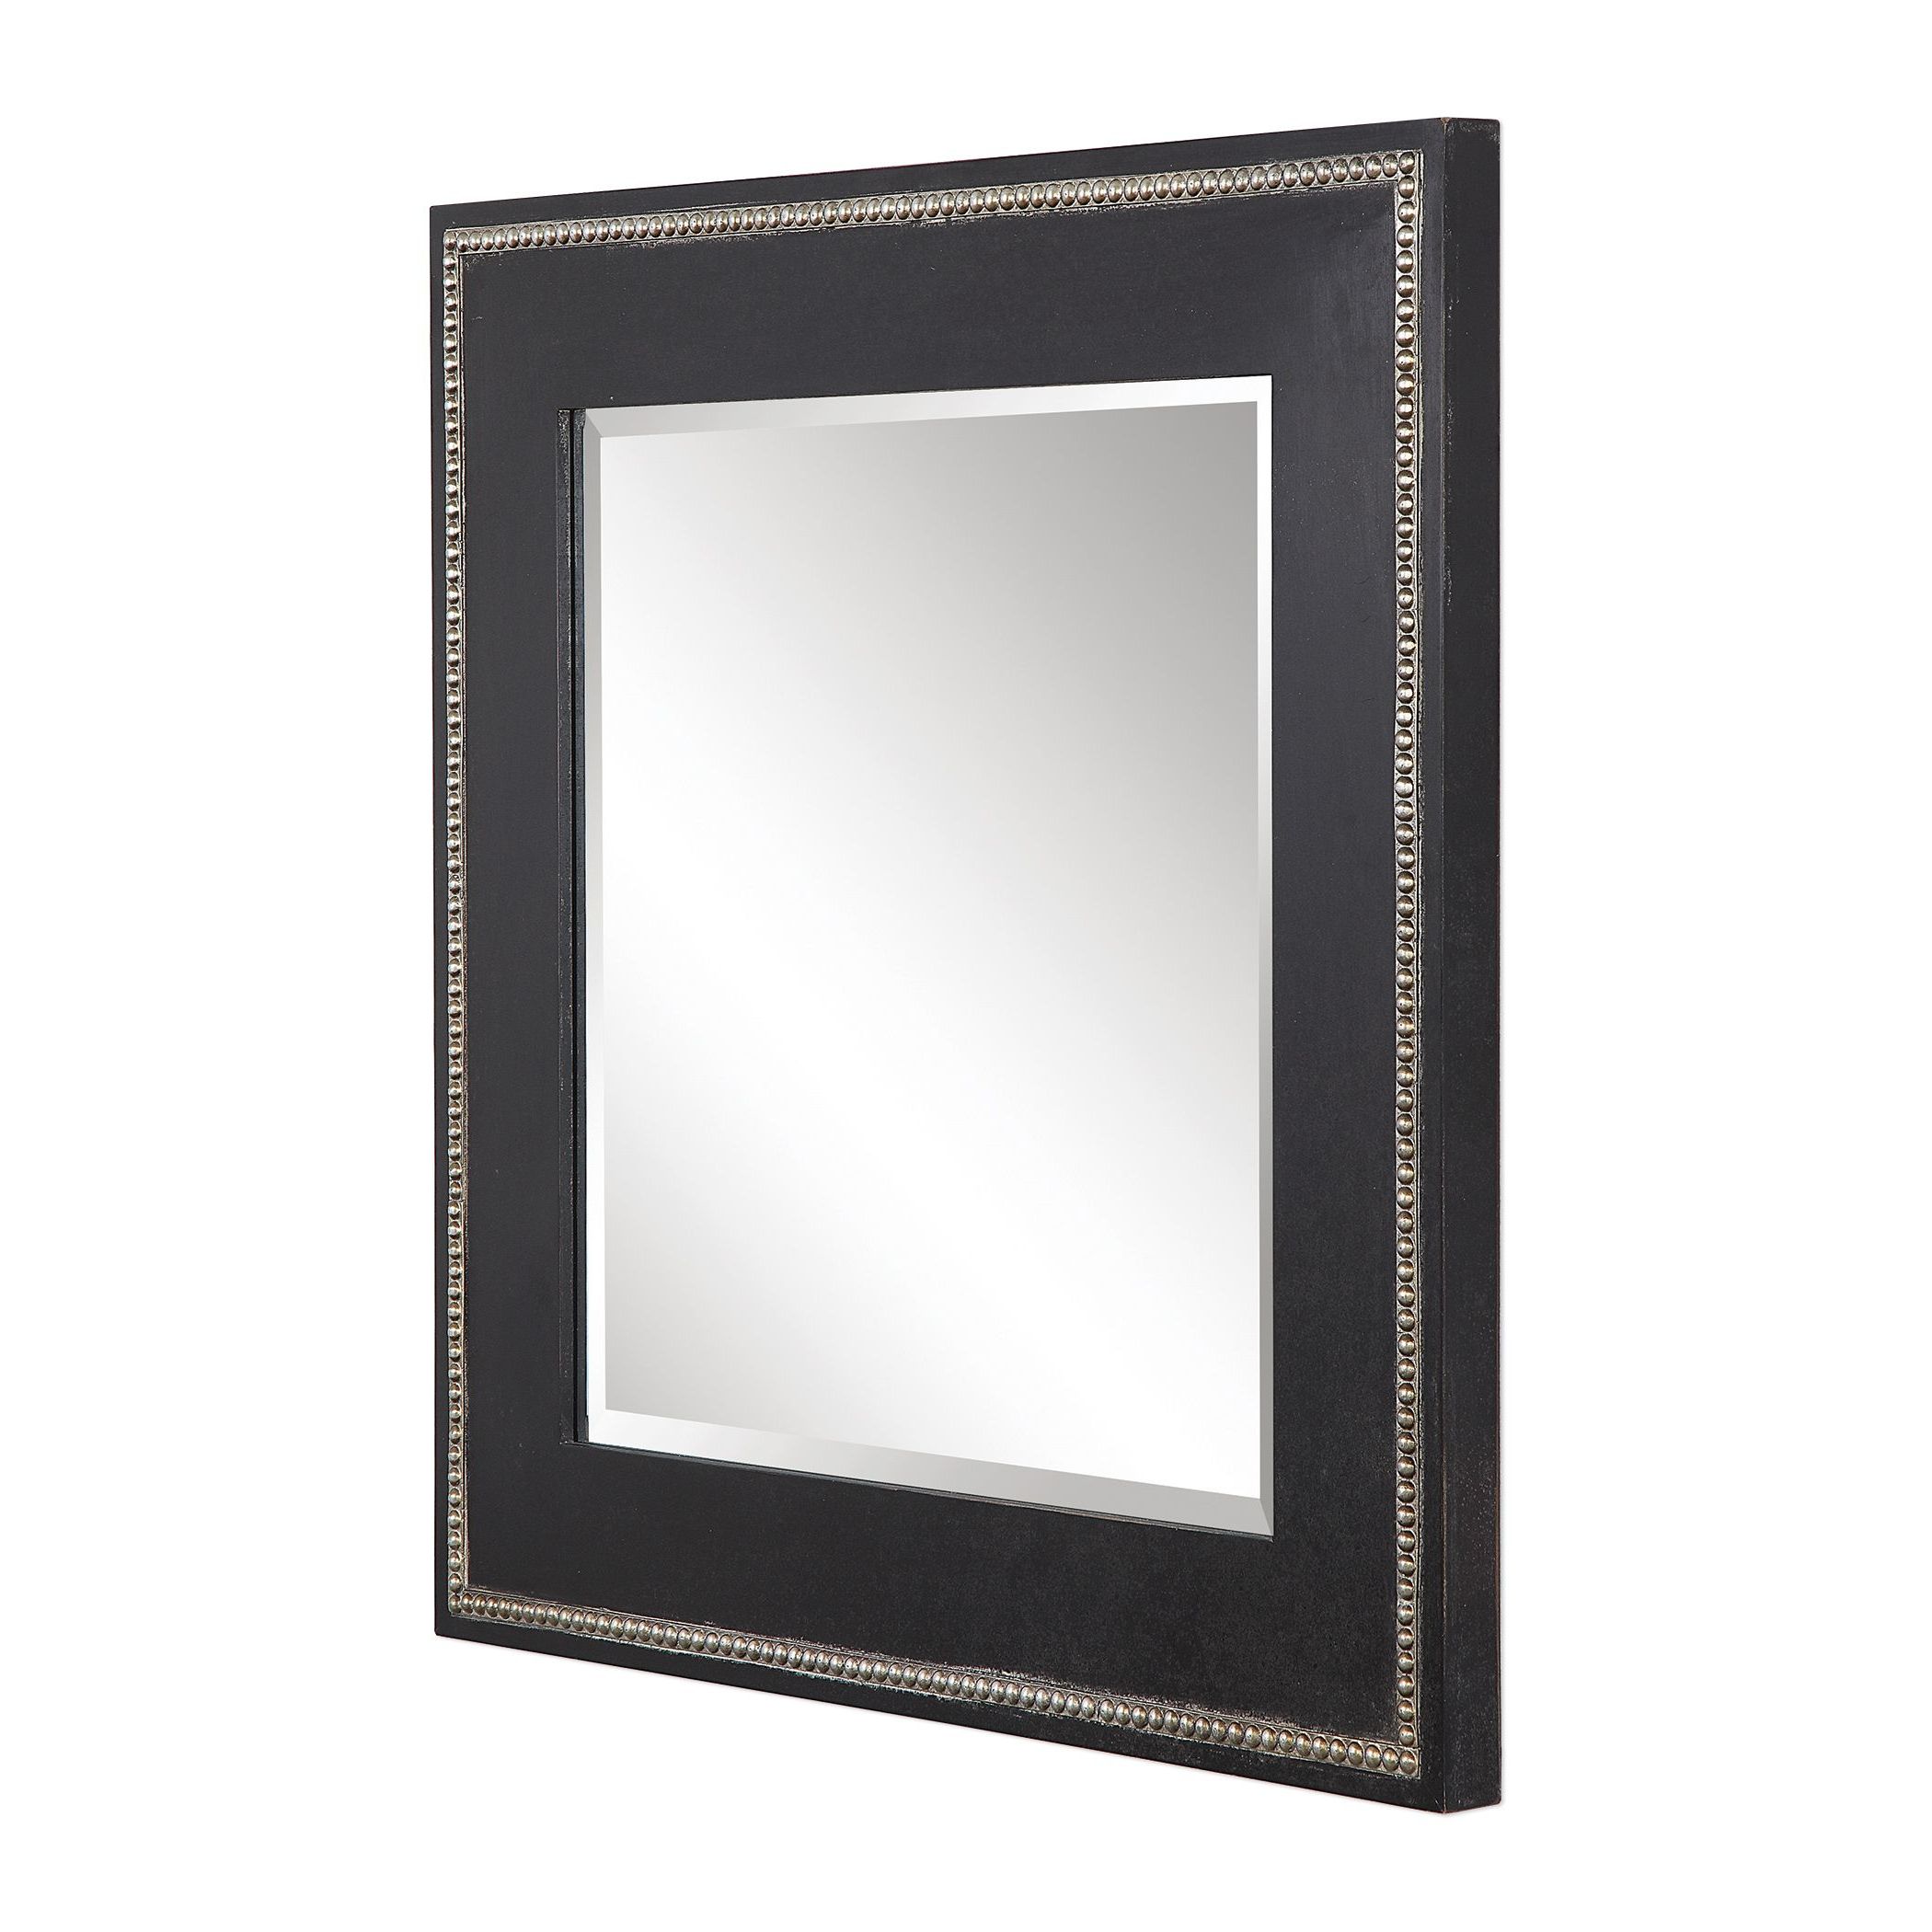 Large Black Square Beveled Wall Mirror Contemporary Style Traditional With Trendy Square Oversized Wall Mirrors (View 12 of 15)